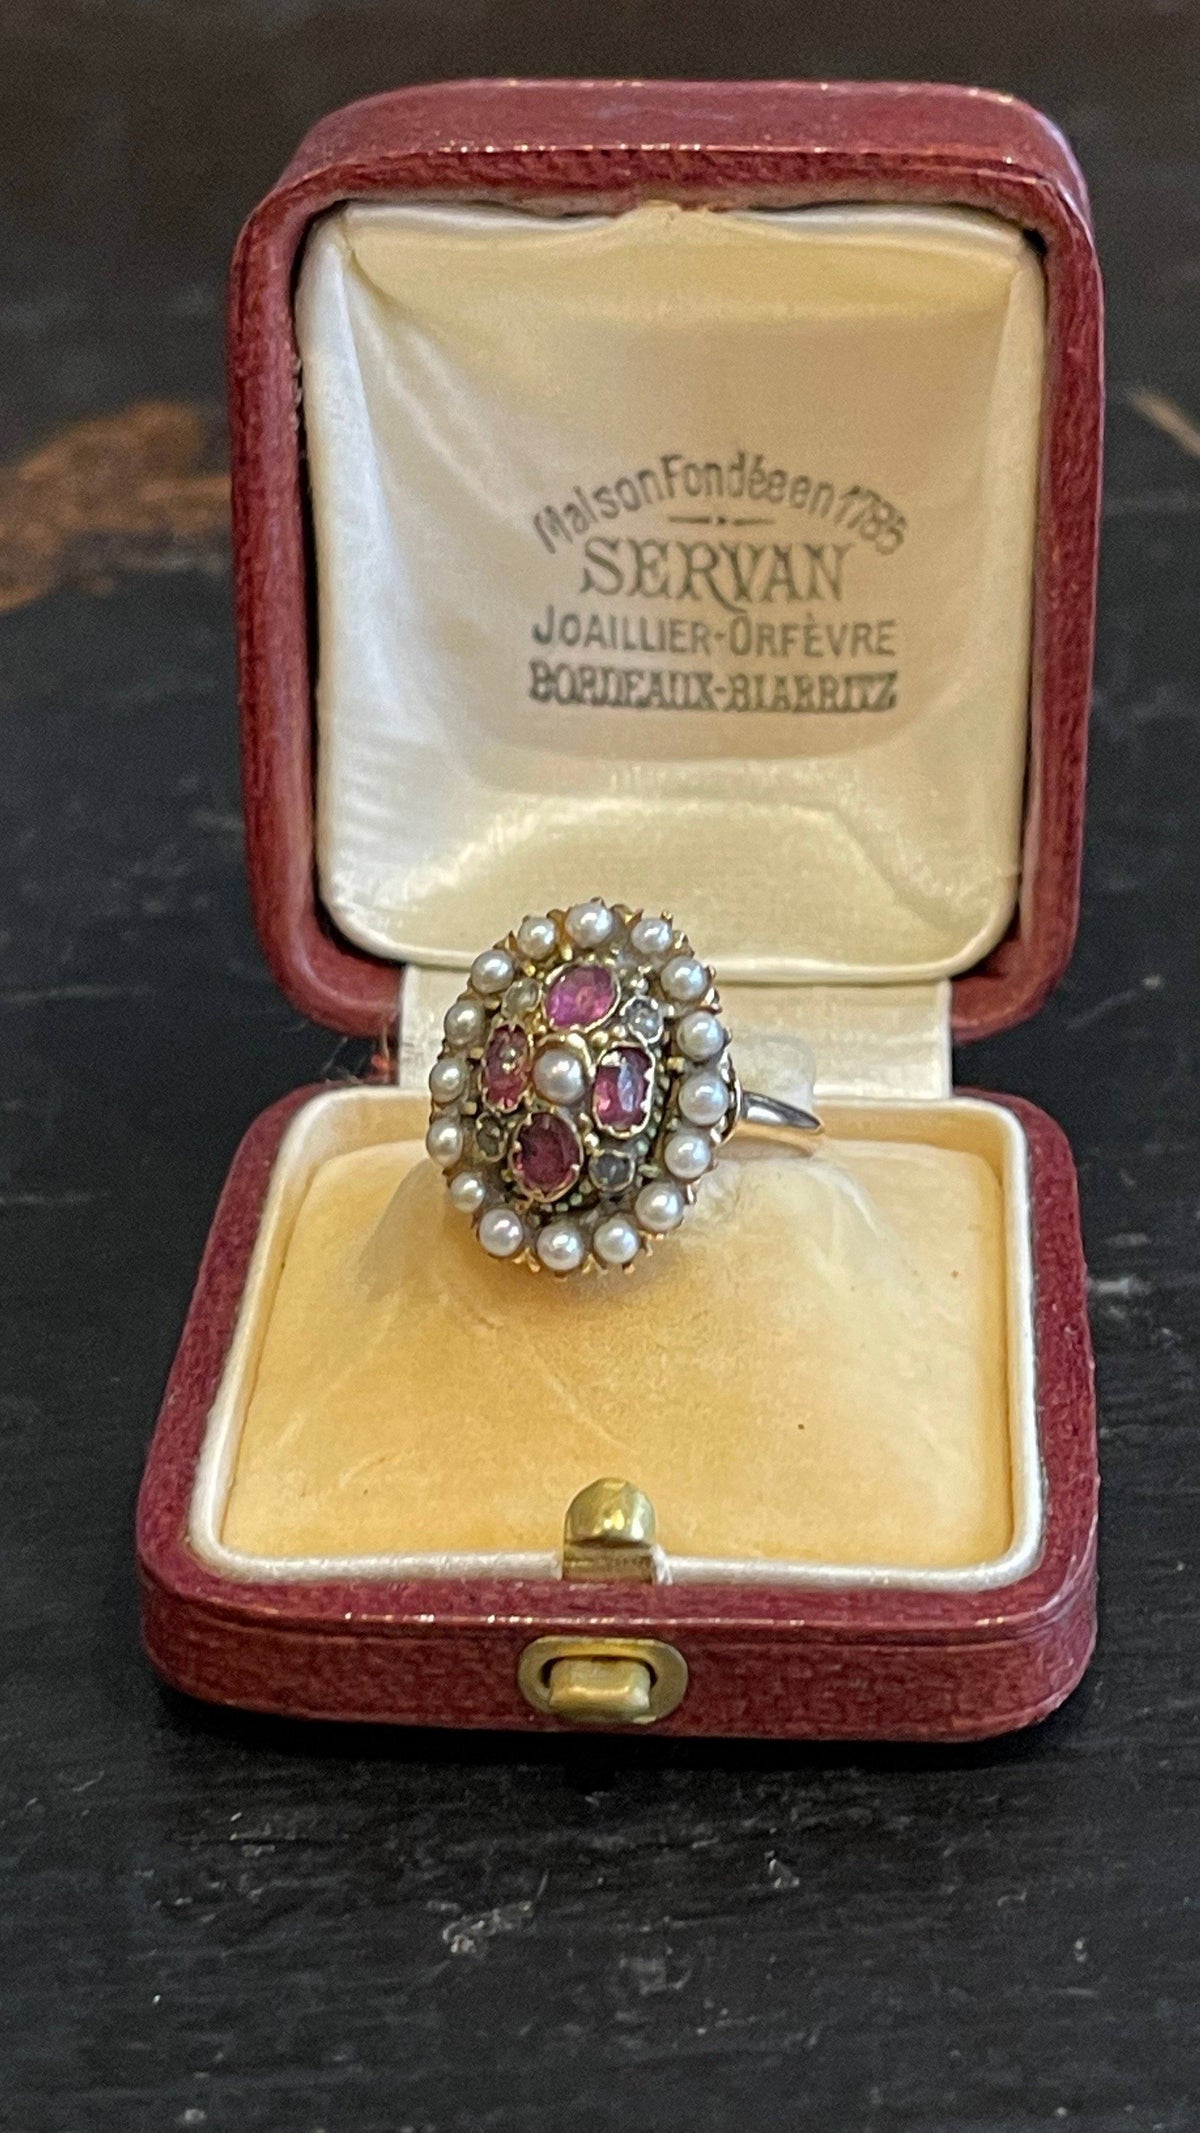 Ring - 19TH CENTURY VICTORIAN GOLD, AMETHYST, &amp; PEARL RING